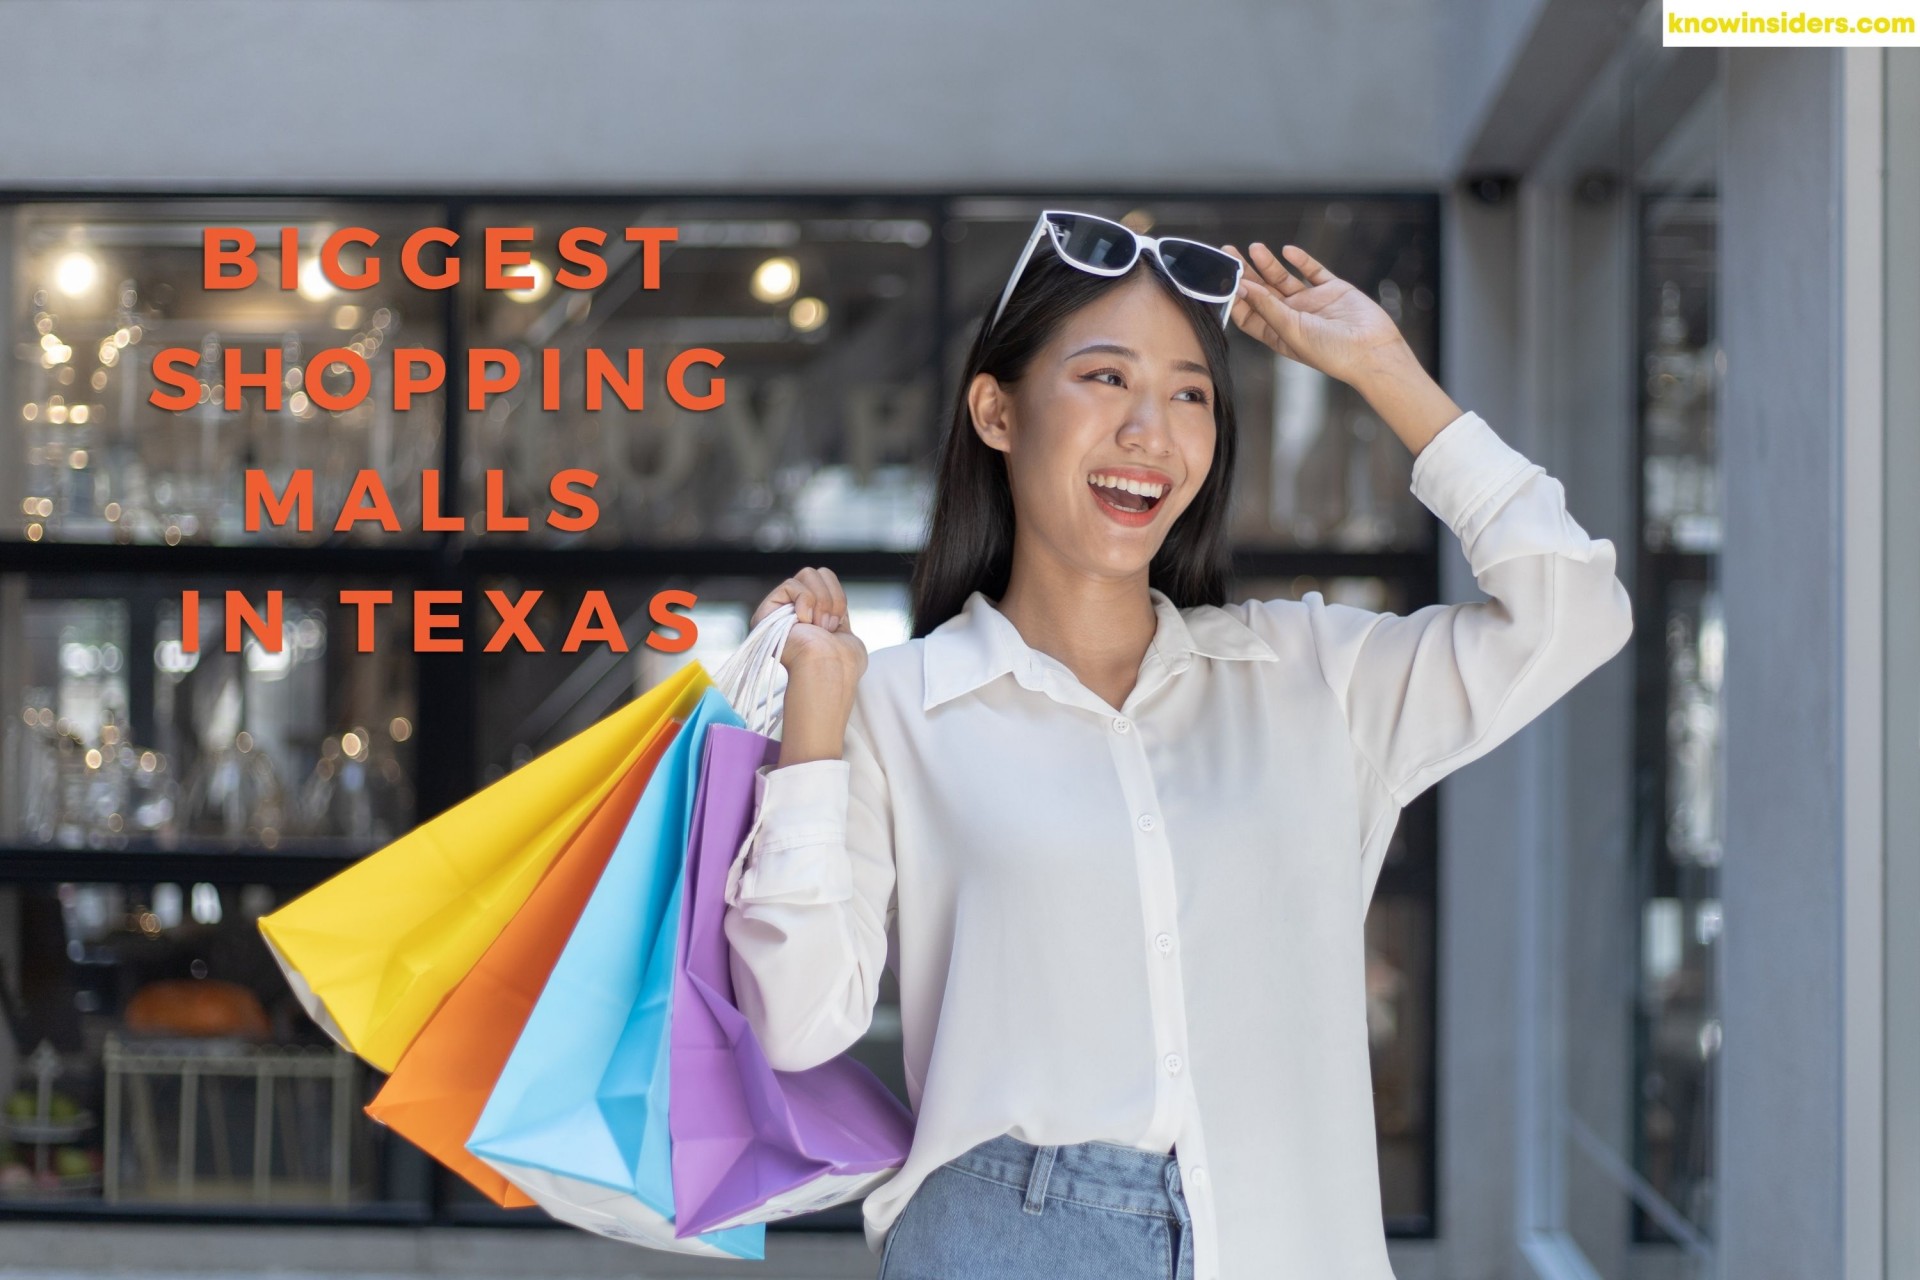 Top 10 Biggest Shopping Malls In Texas for Foreigners